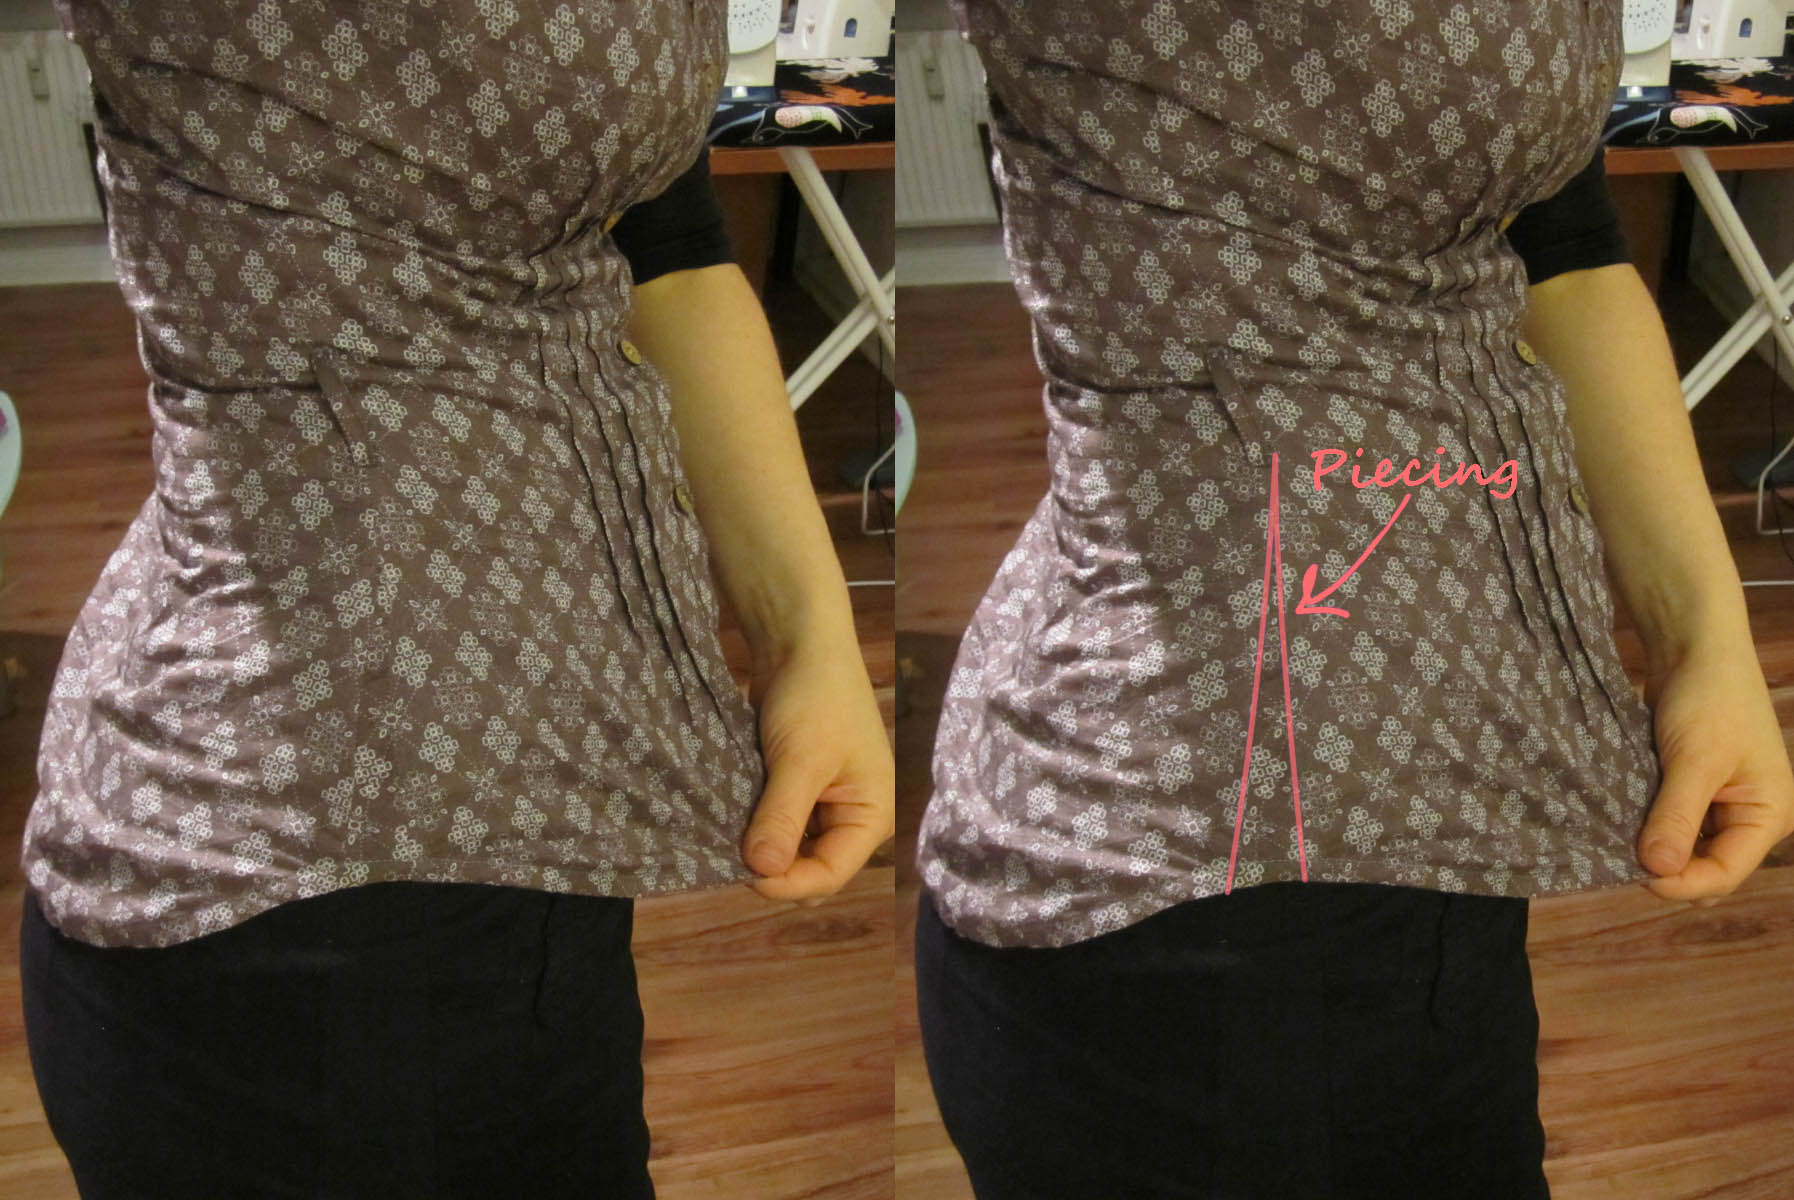 Making a blouse larger in the waist, matching prints